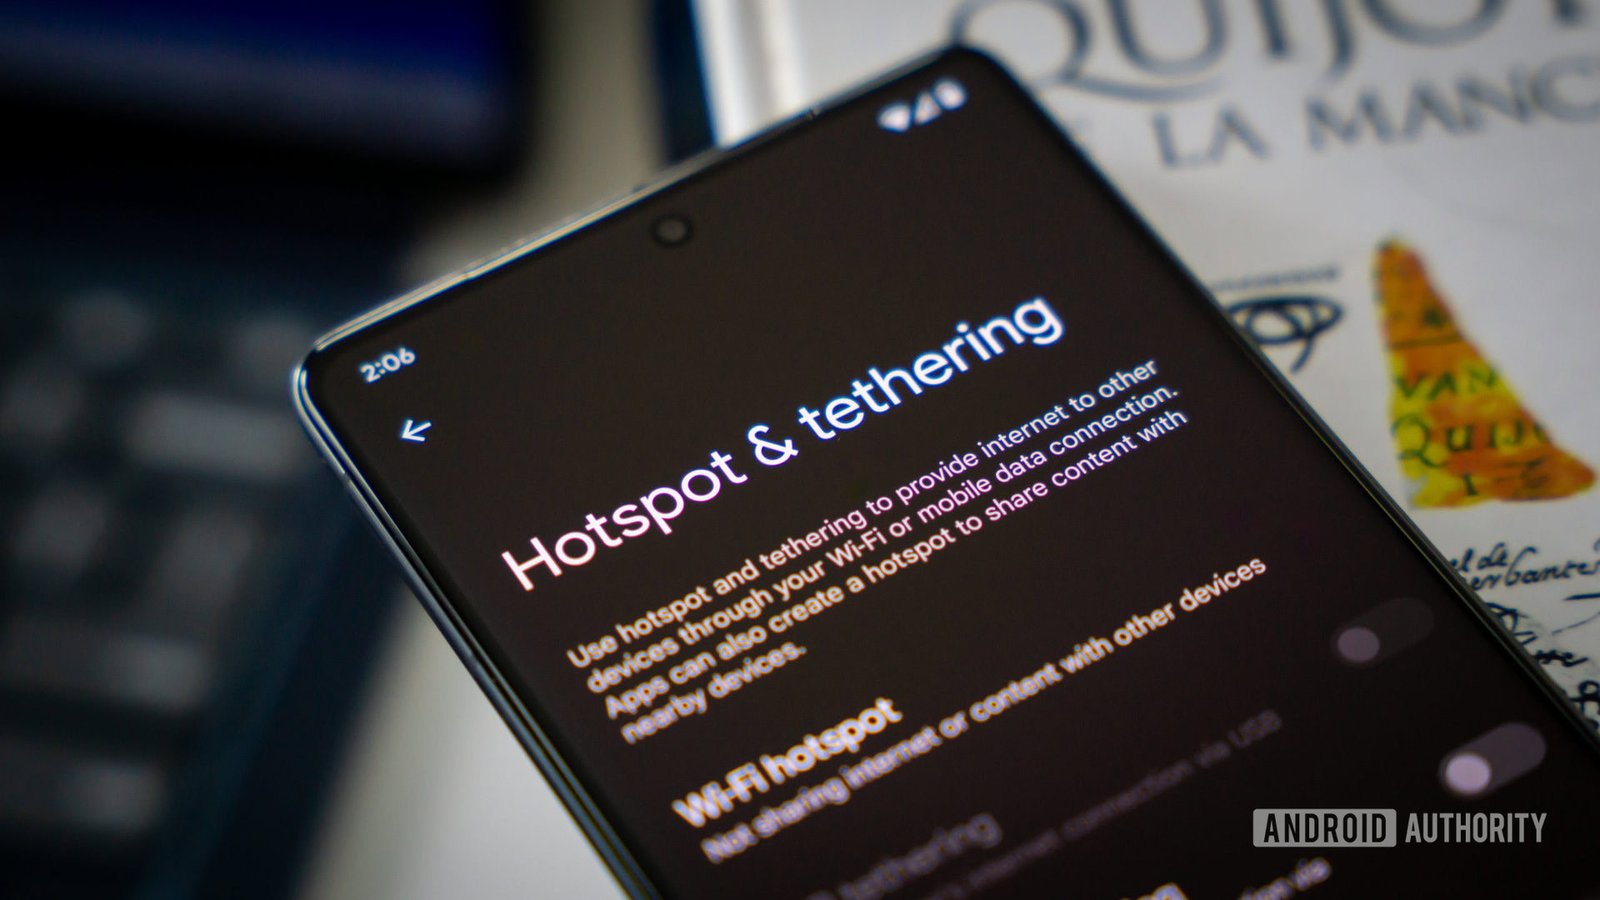 Android Instant Hotspot feature detailed in support page